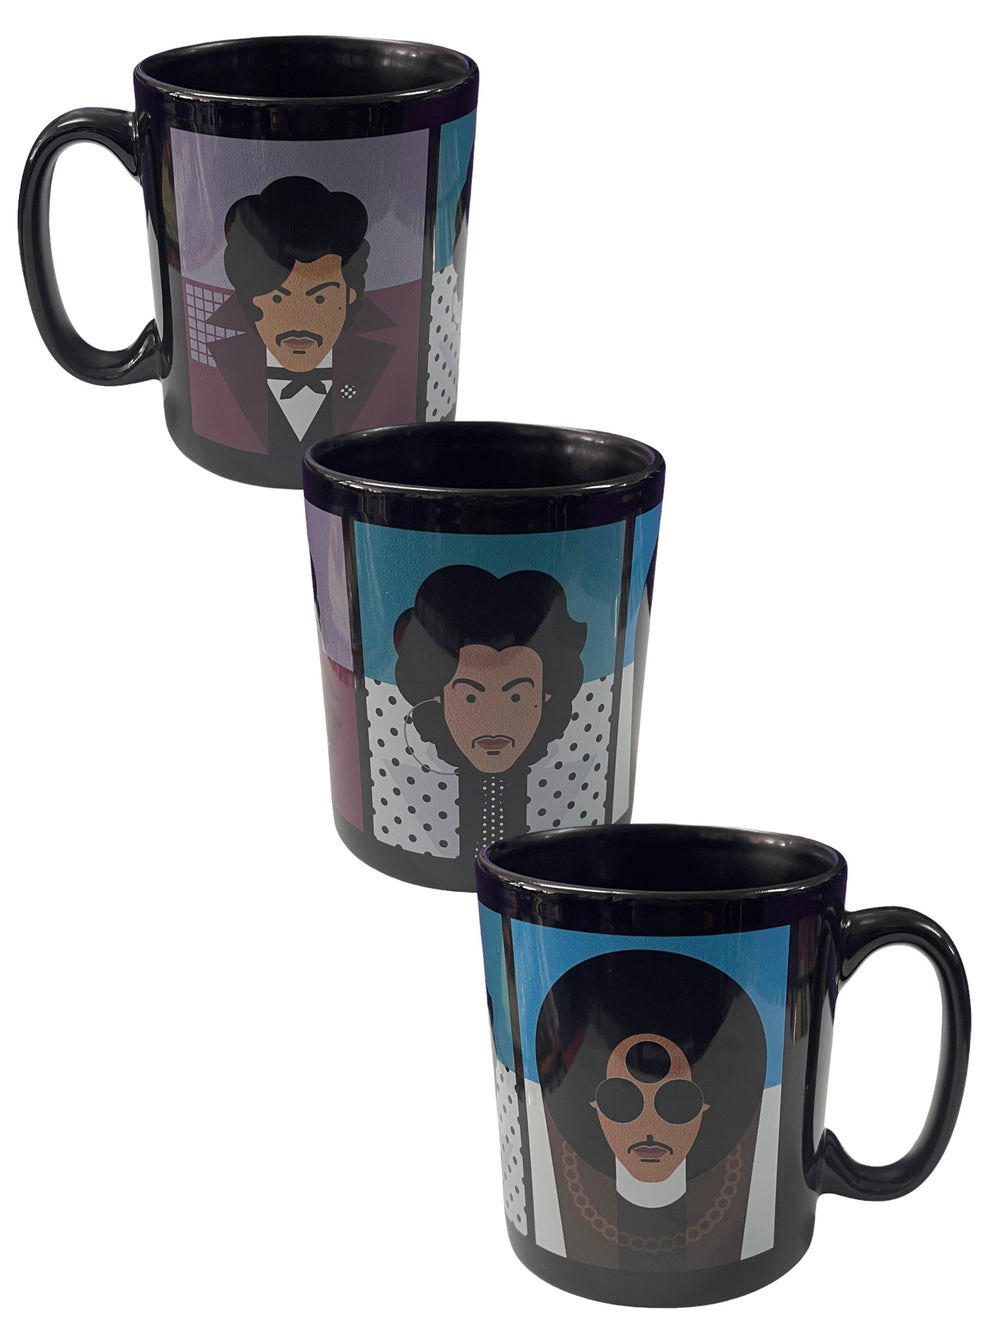 Prince Many Faces Of Official Licensed Ceramic Mug Black XCLUSIVE